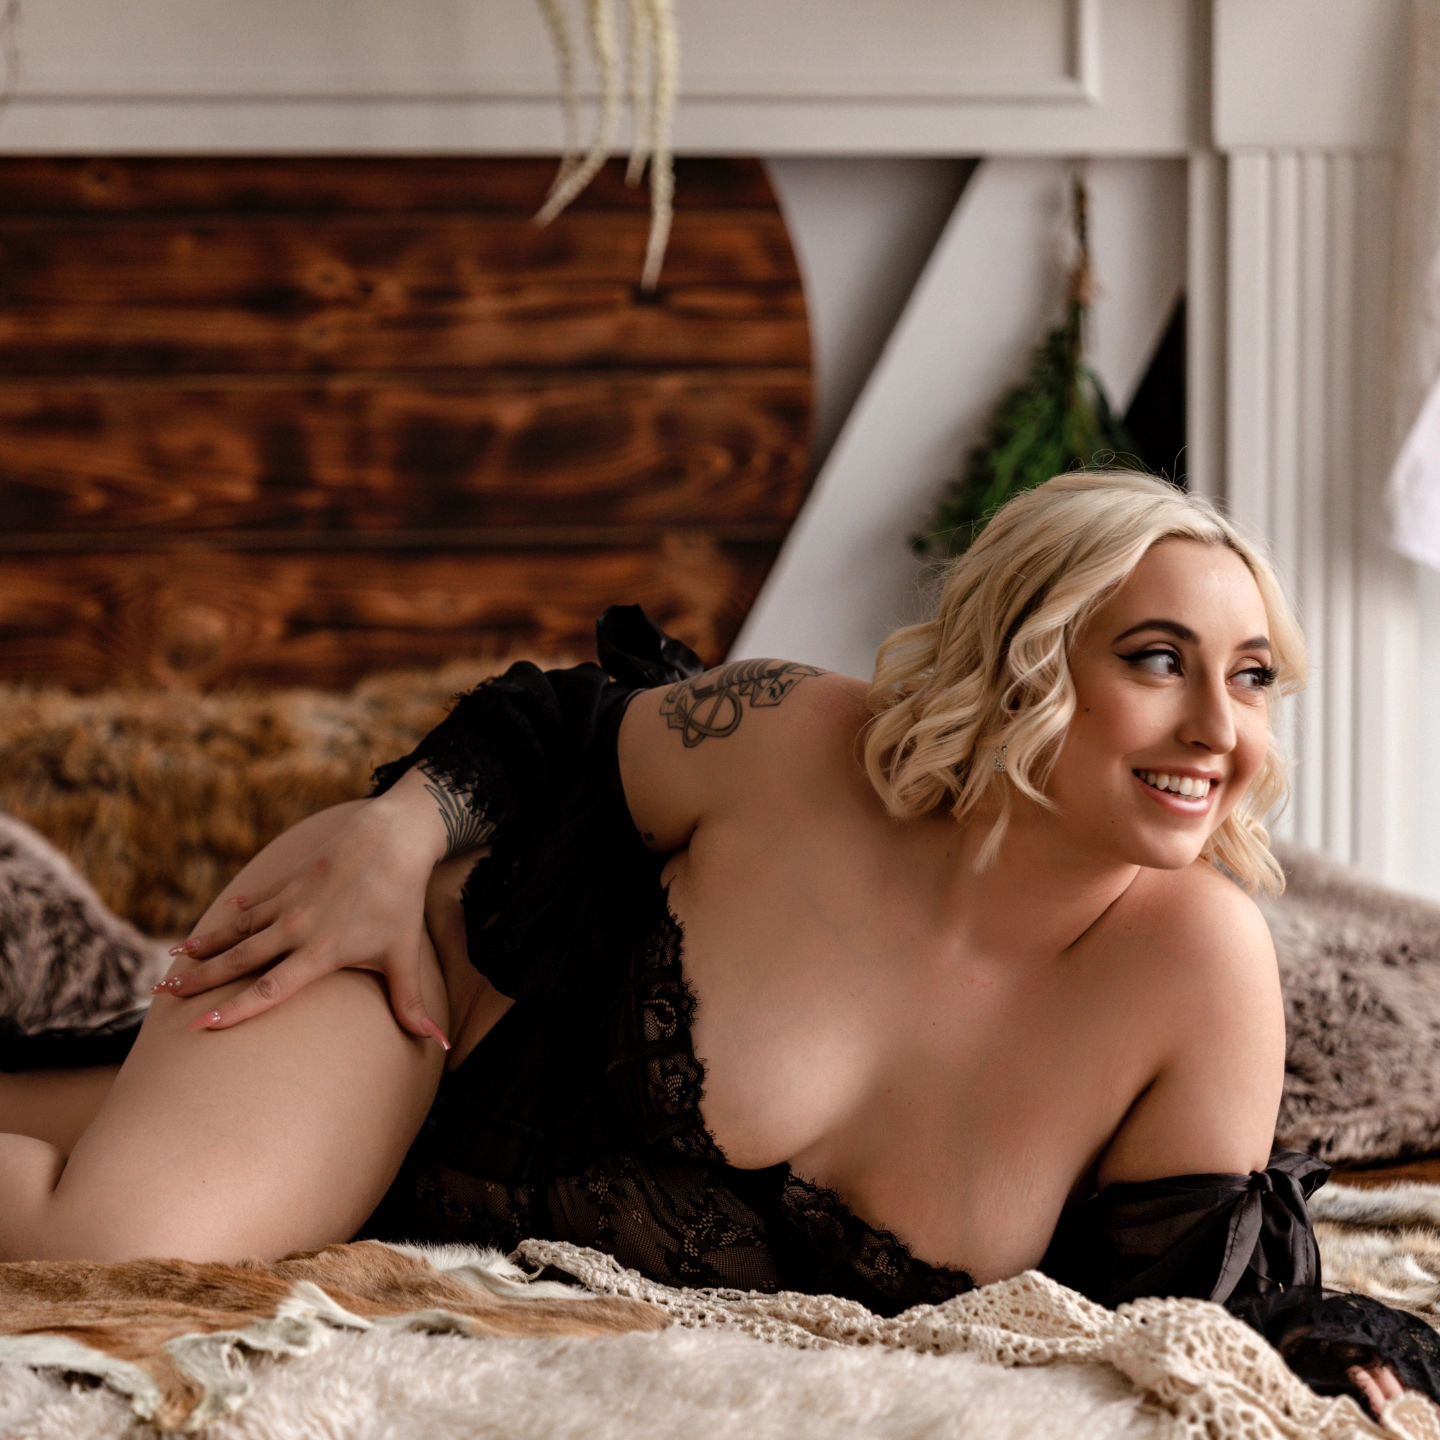 Posed vs Candid. Which do you prefer? 
@river_rose_boudoir